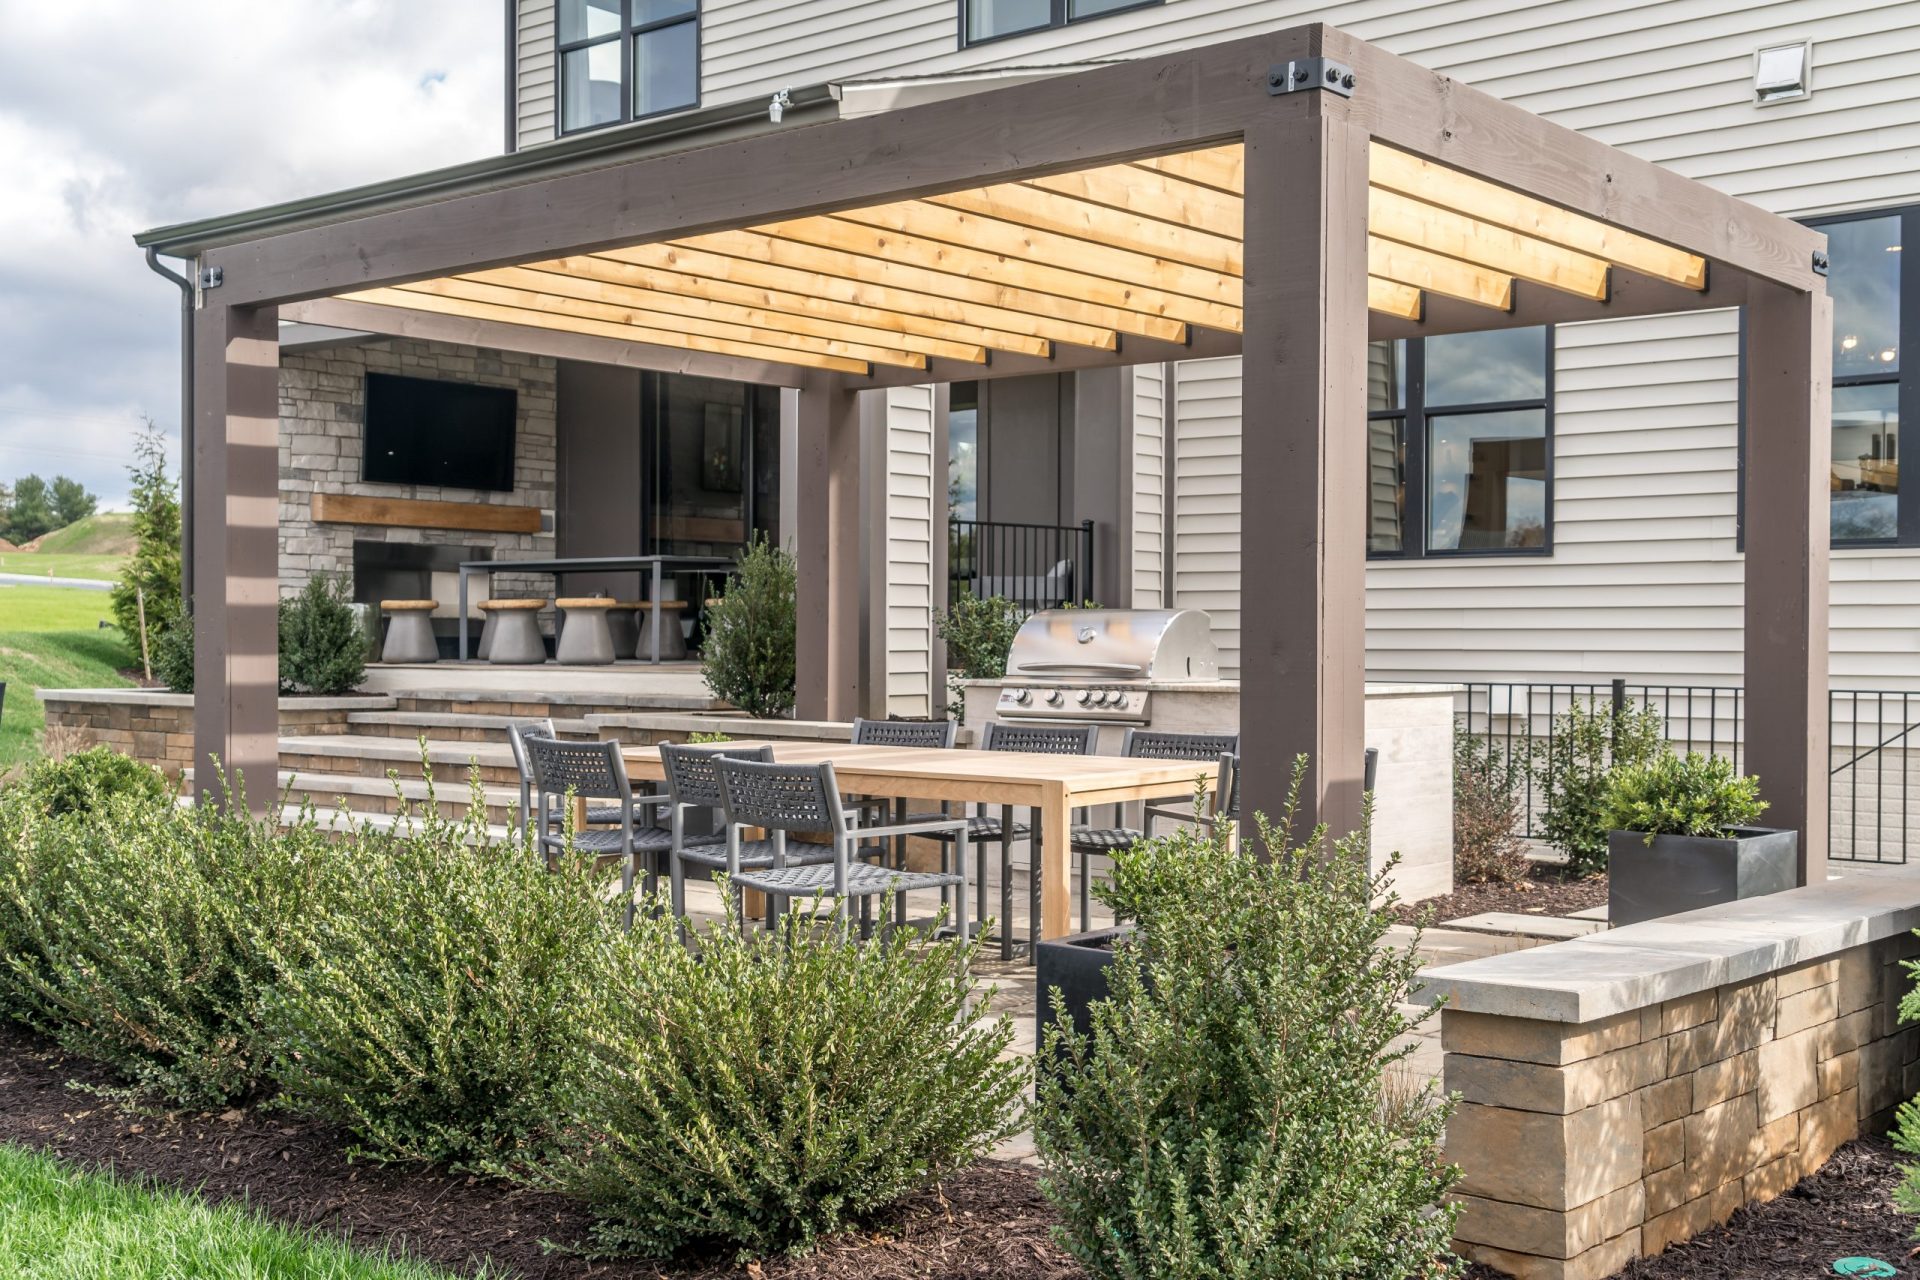 Can You Grill Under a Pergola?